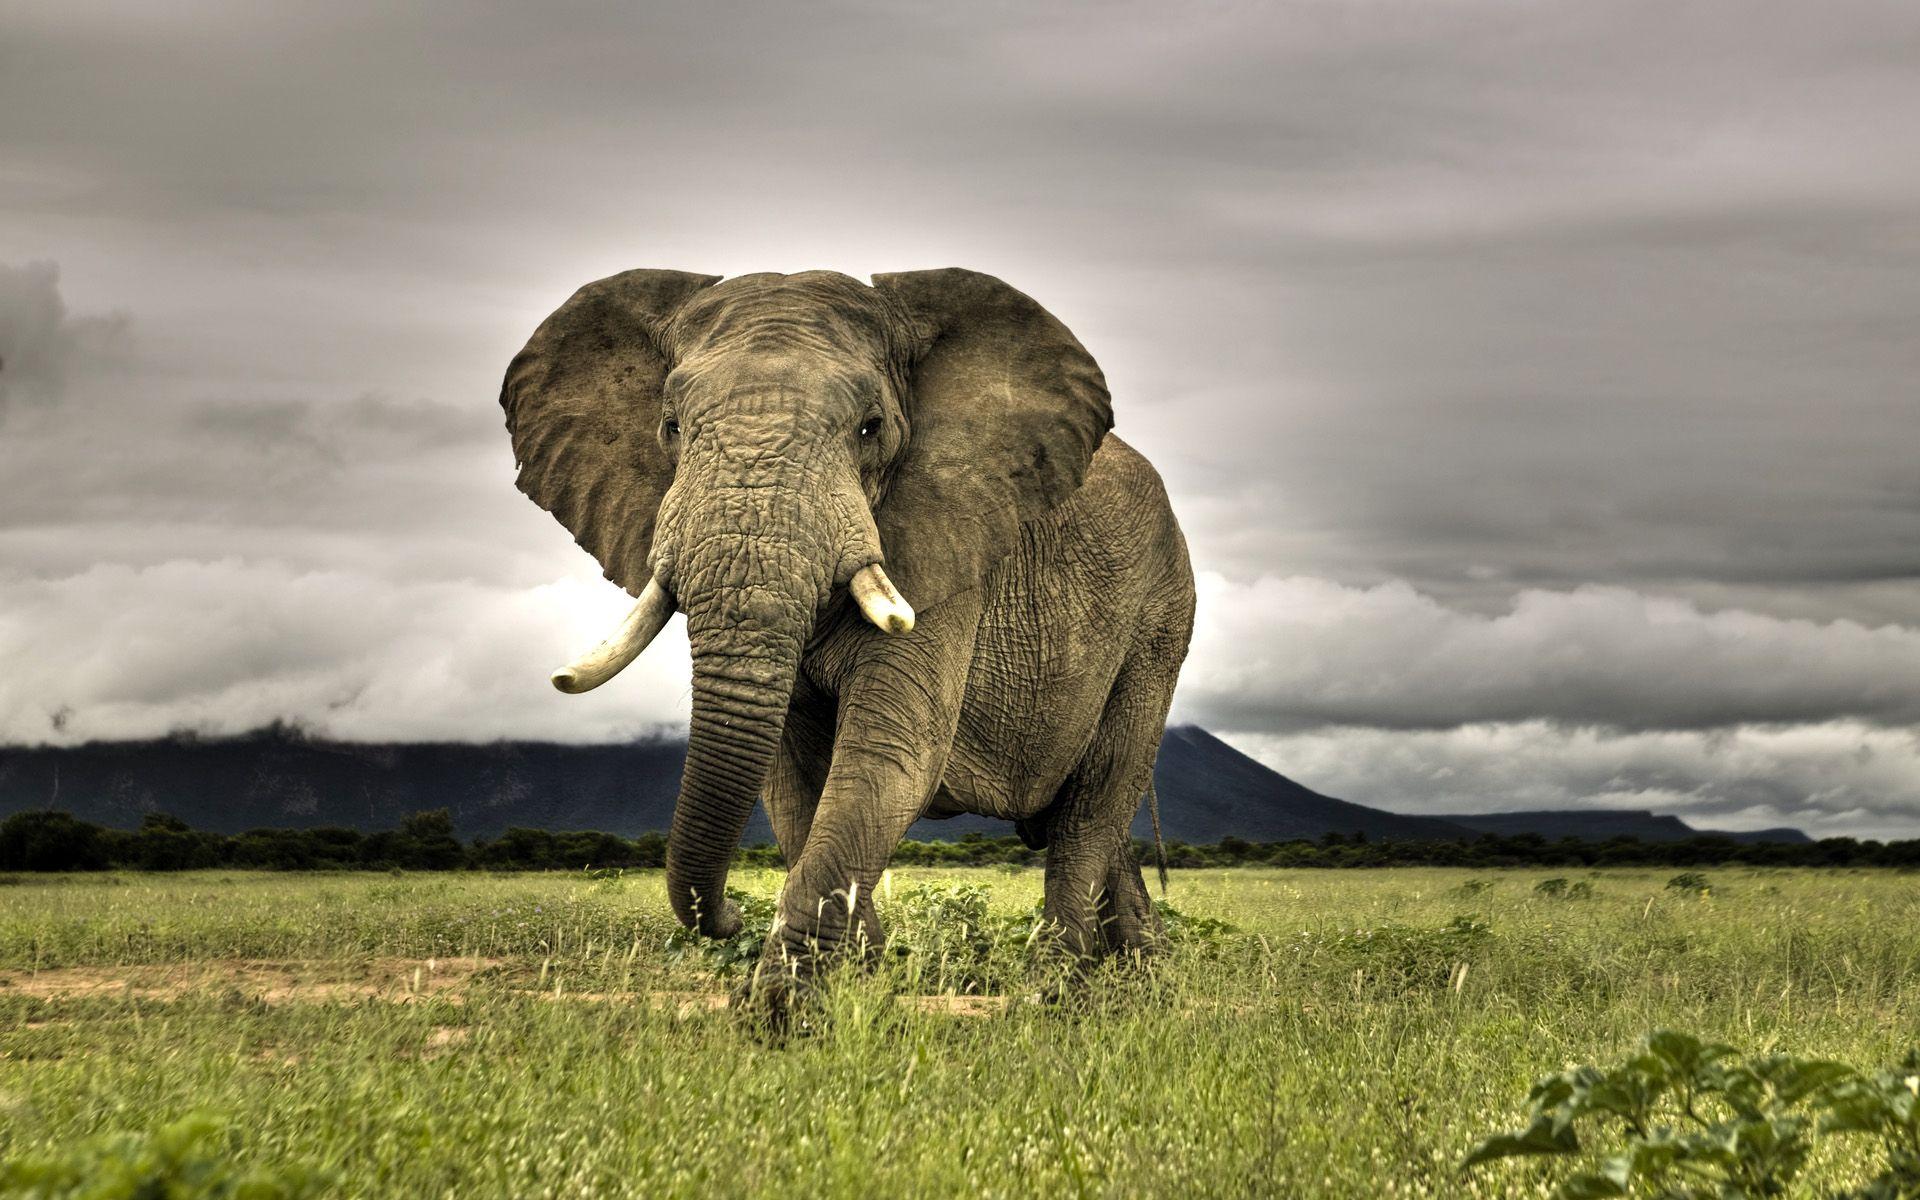 Elephants HD Image, Picture And Free Wallpaper Download